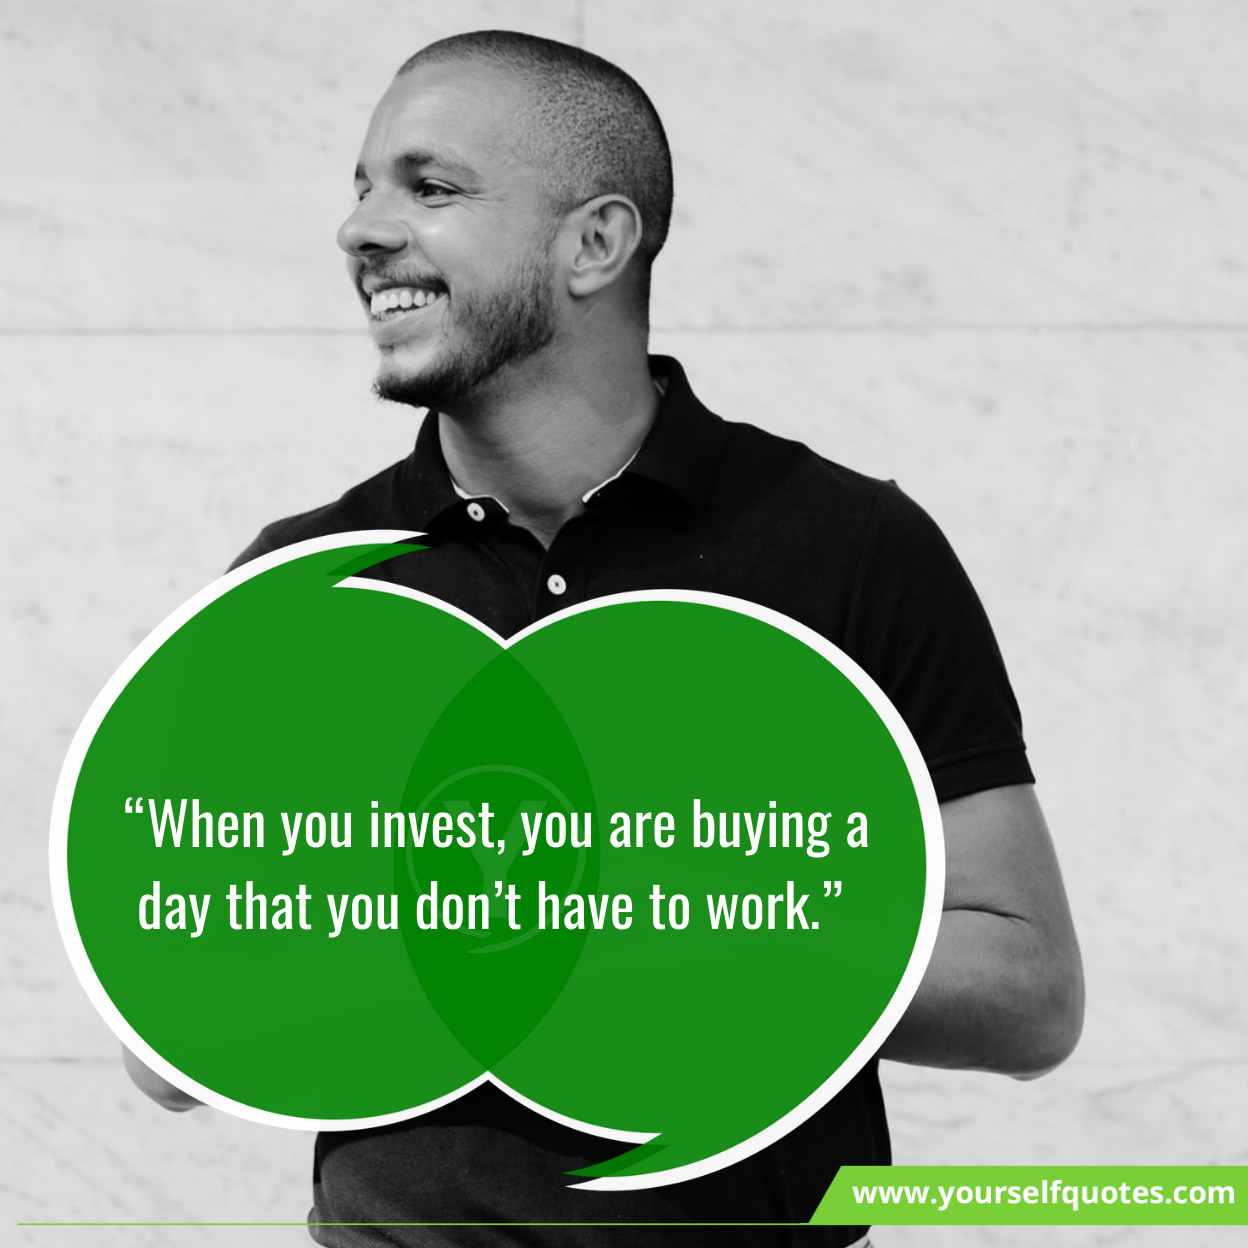 Inspiring Quotes On Investment